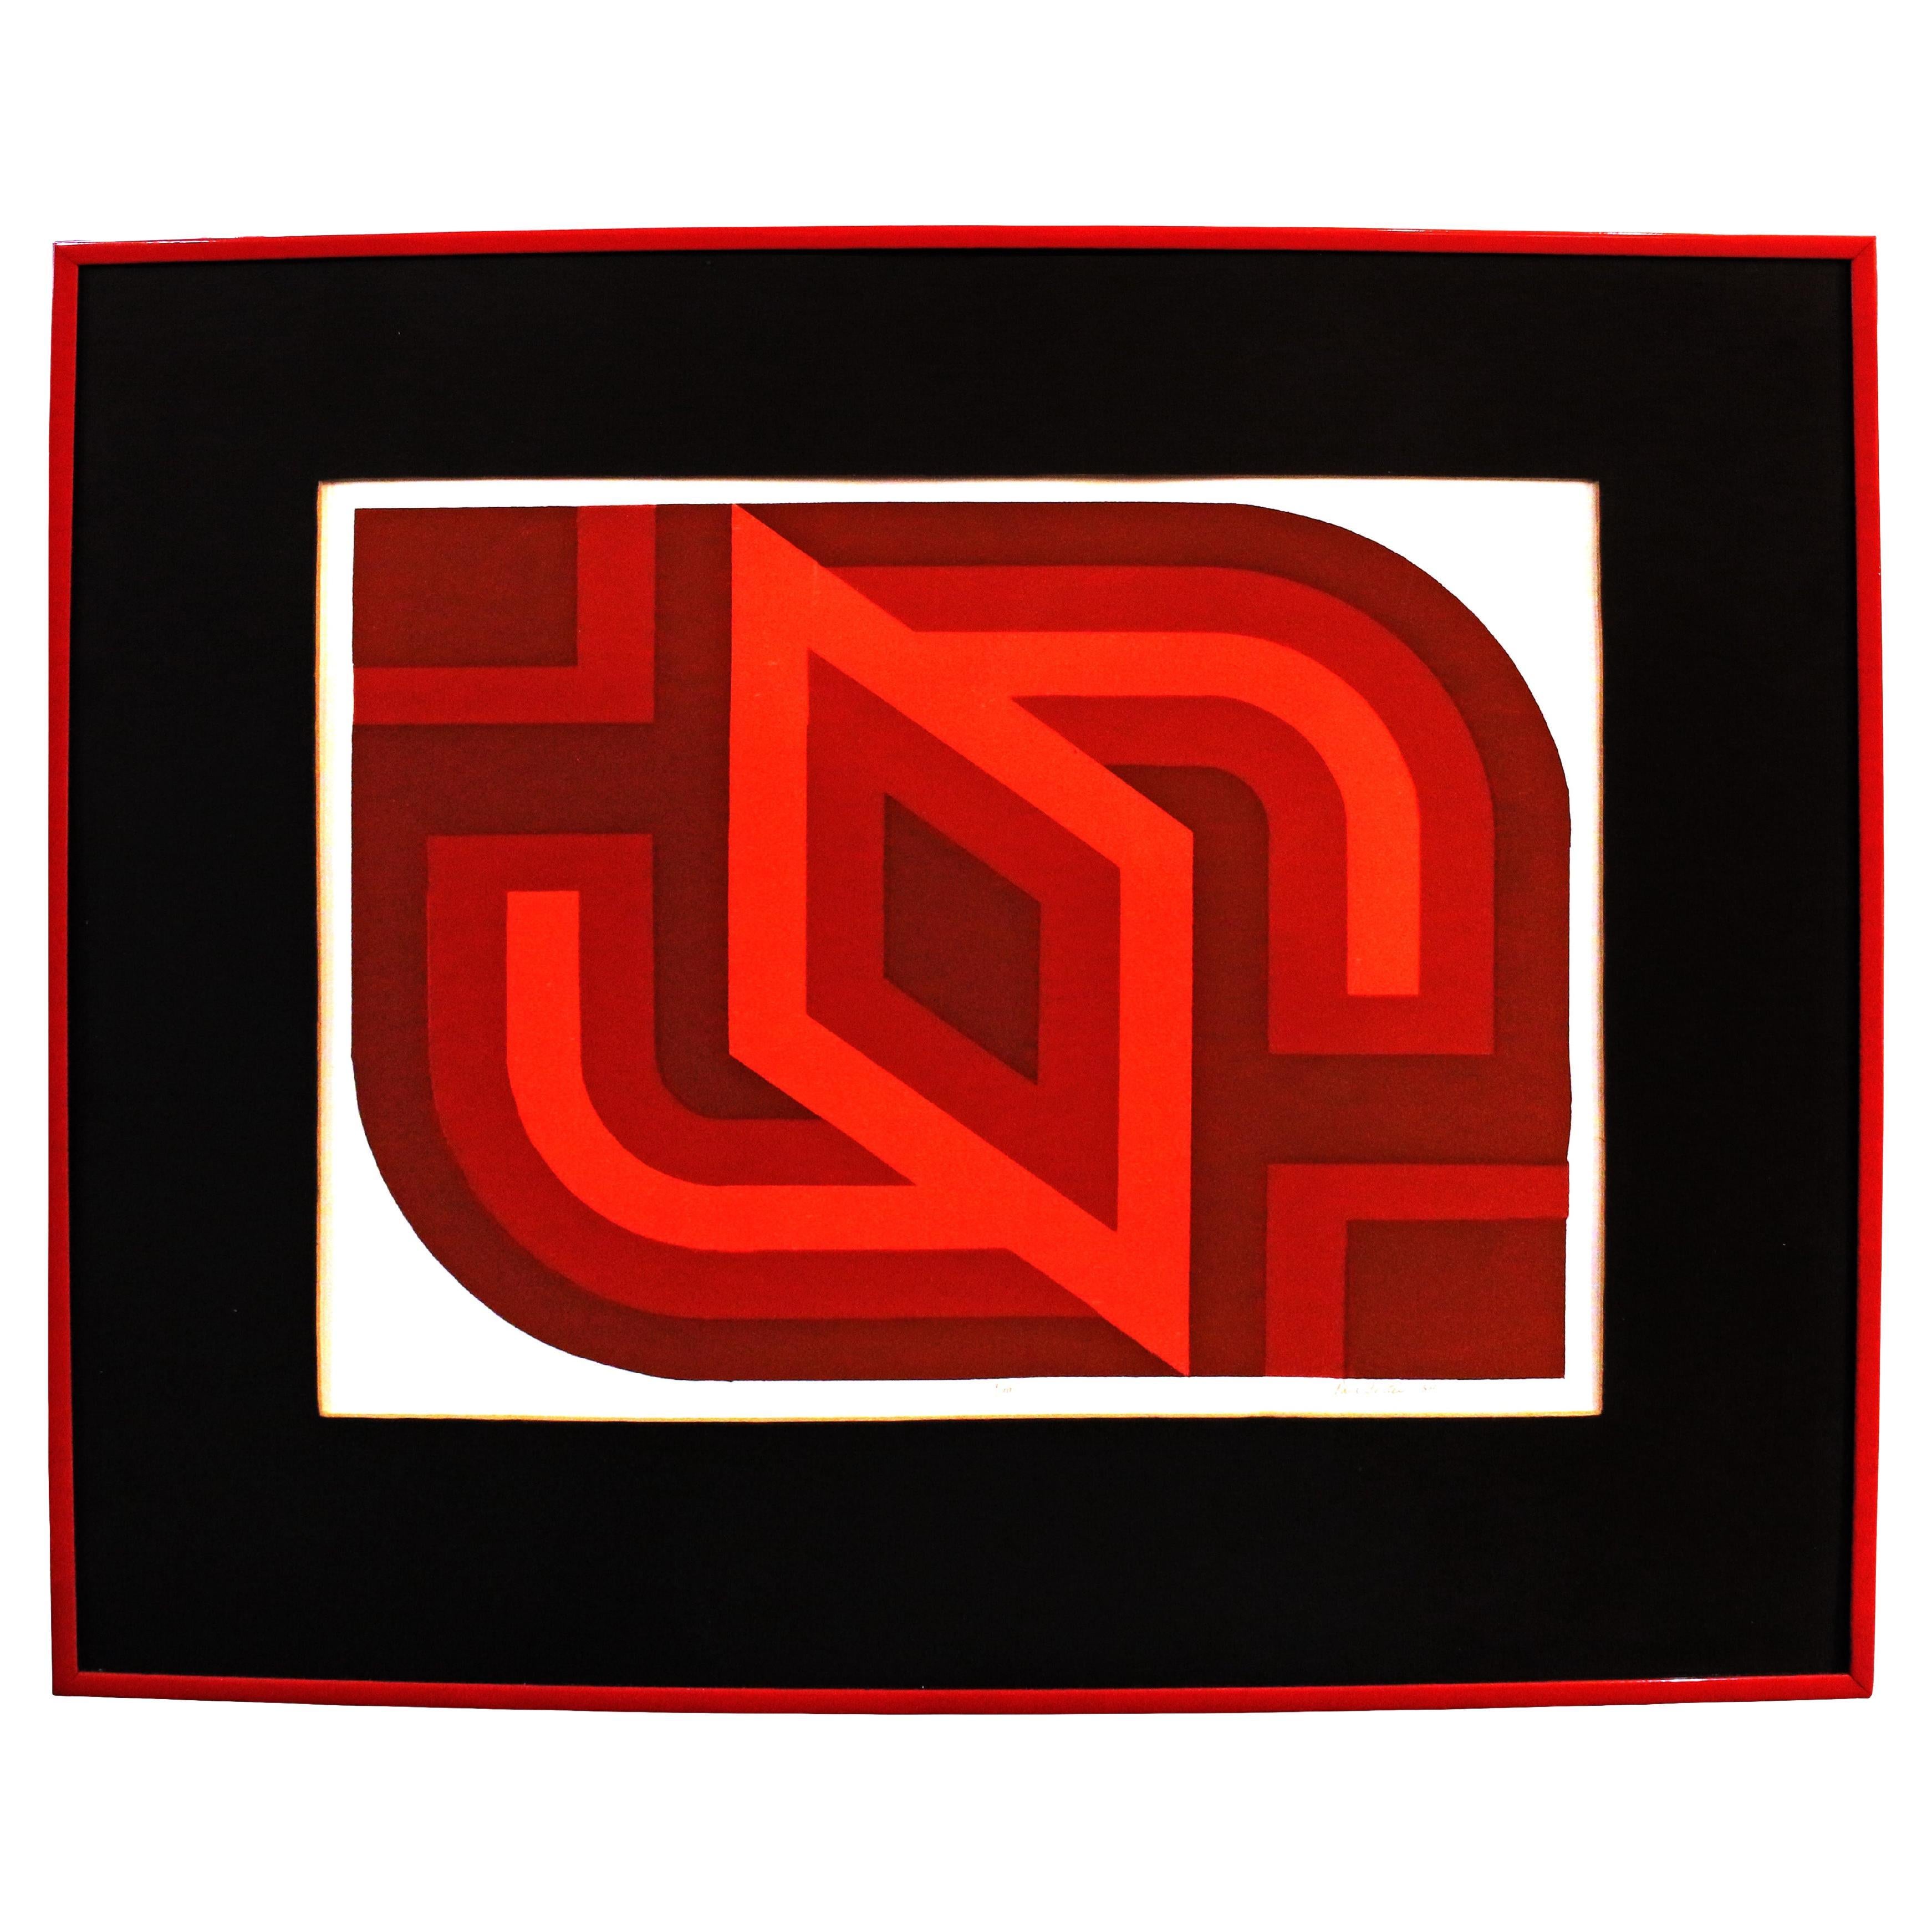 "Homage to Albers" by Paul Ferster 1984 Screen Print